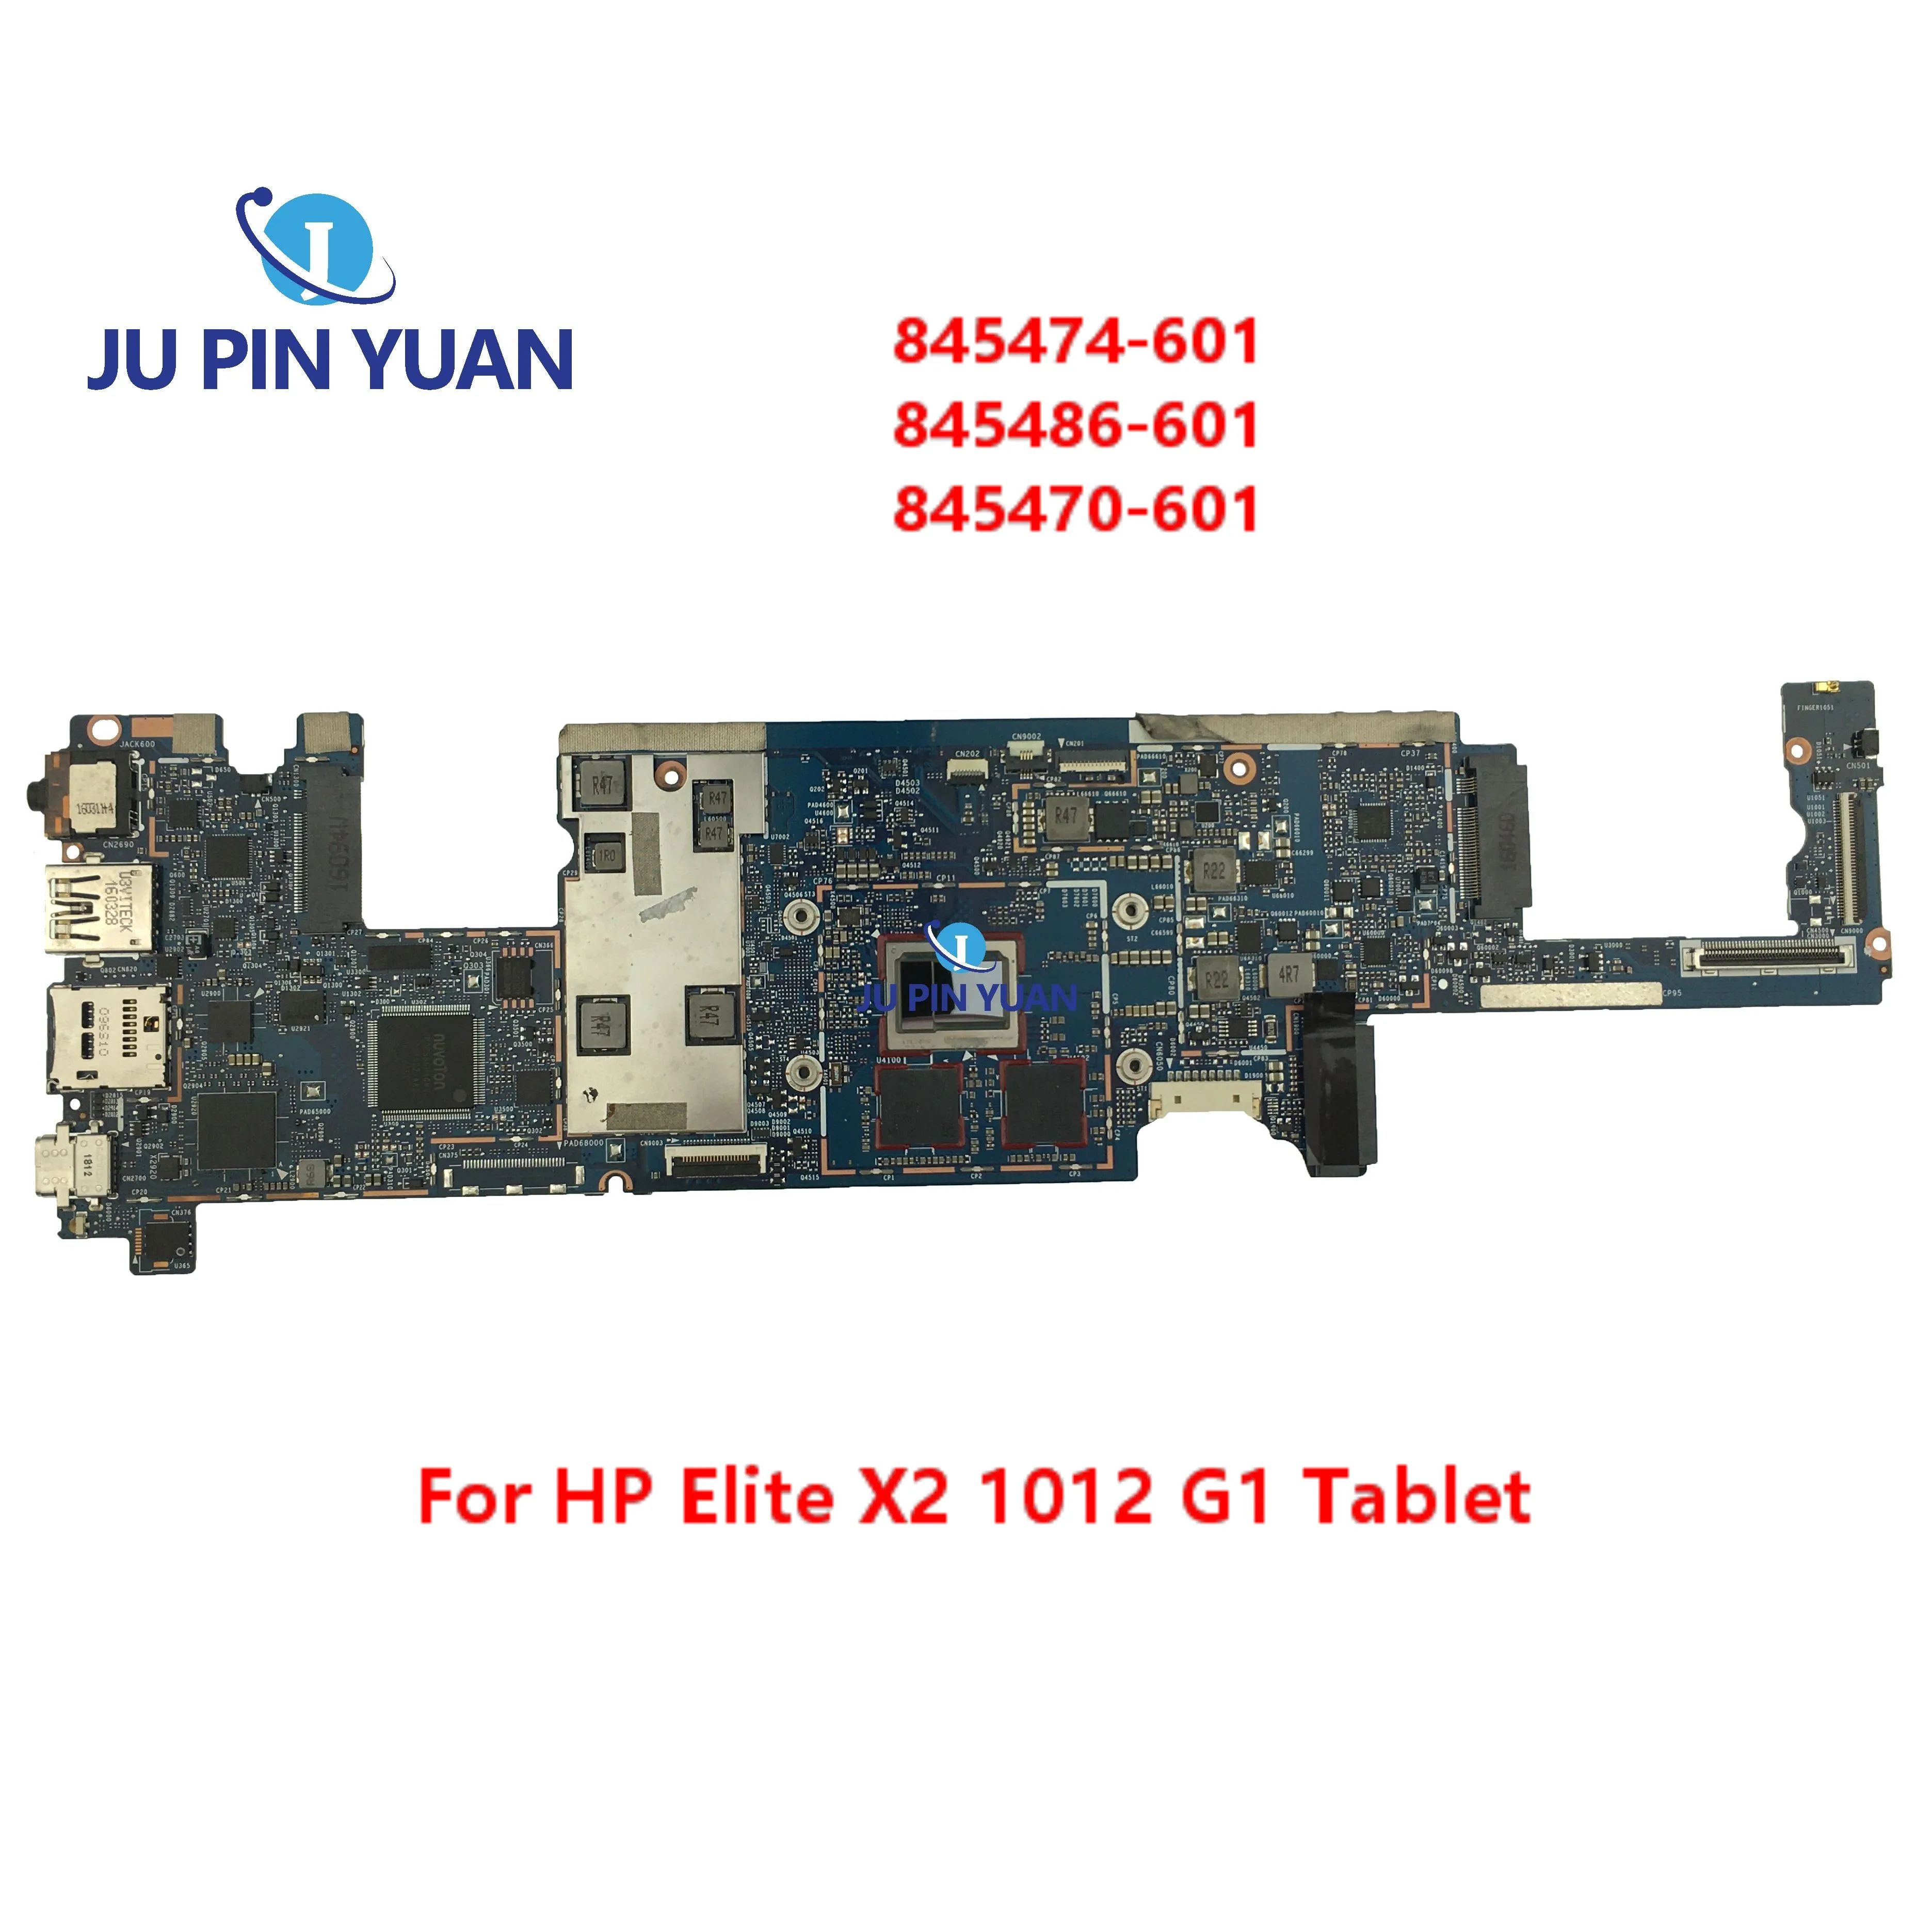 

For HP Elite X2 1012 G1 Tablet Motherboard 845470-601 6050A2748801-MB-A01 845474-601 845486-601 Mainboard